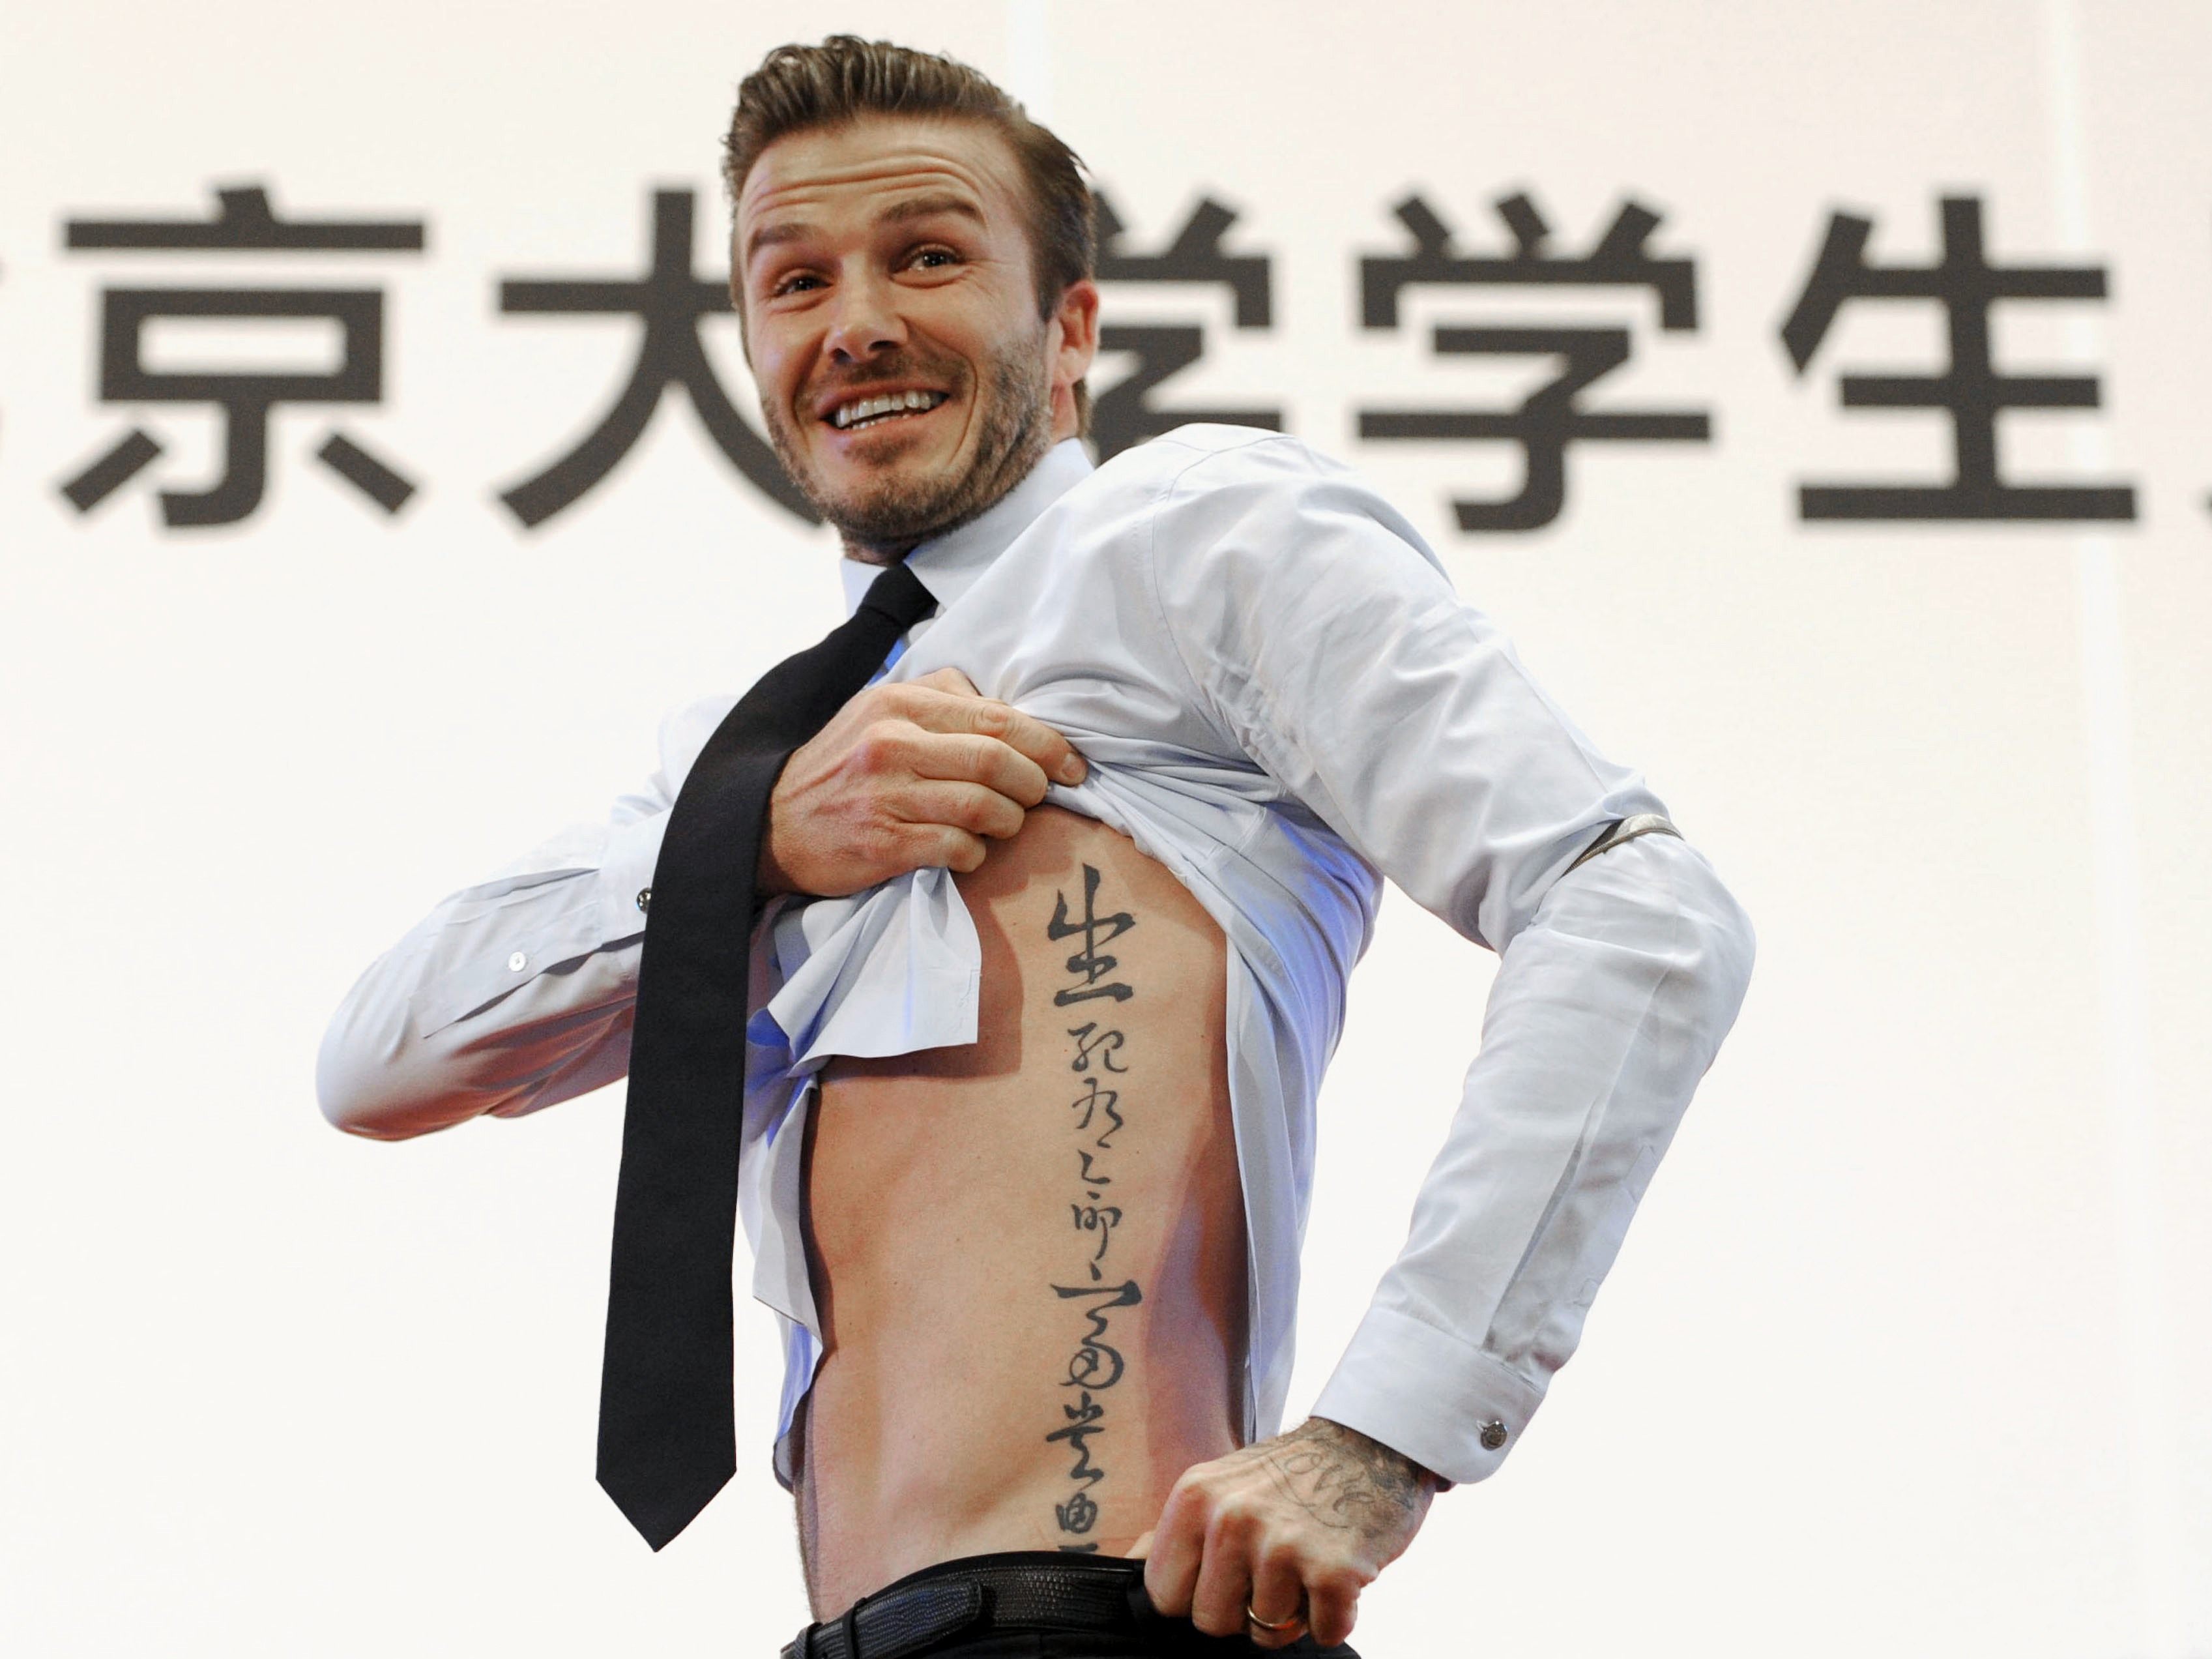 David Beckham is just one of many celebrities who rocks tattoos, but who does he get inked by? Photo: Reuters